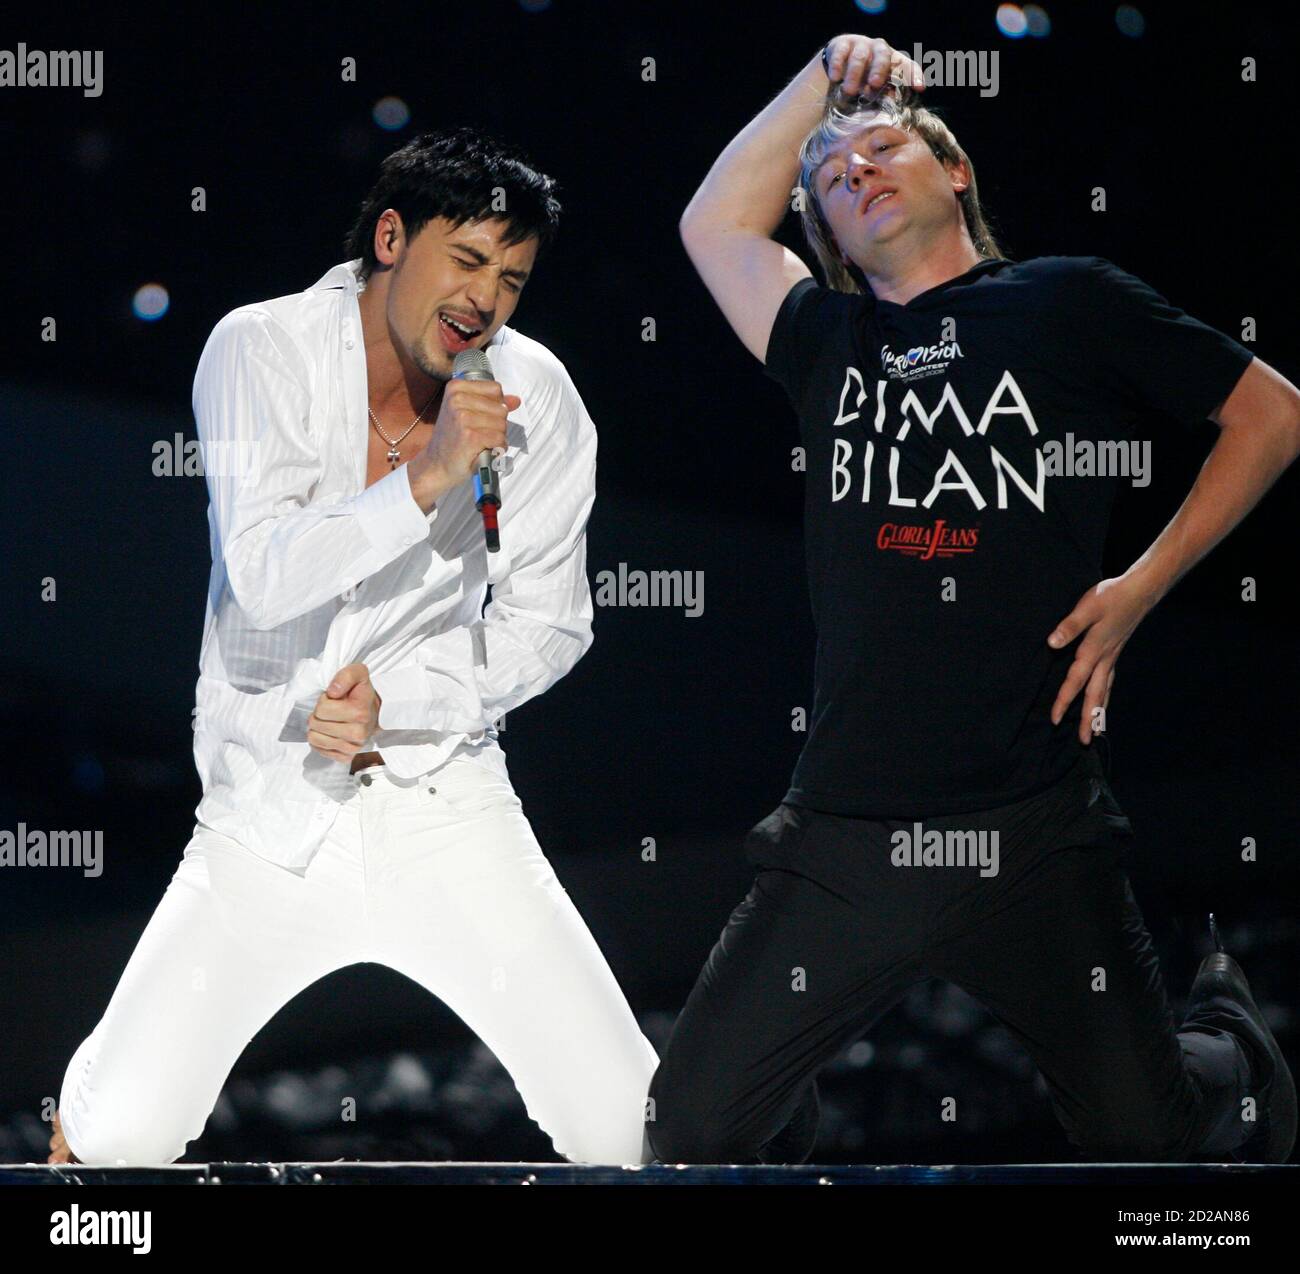 Dima Bilan (L) of Russia performs with Olympic and World figure skating  champion Evgeni Plushenko during rehearsals for the Eurovision Song Contest  in Belgrade May 16, 2008. REUTERS/Ivan Milutinovic (SERBIA Stock Photo -